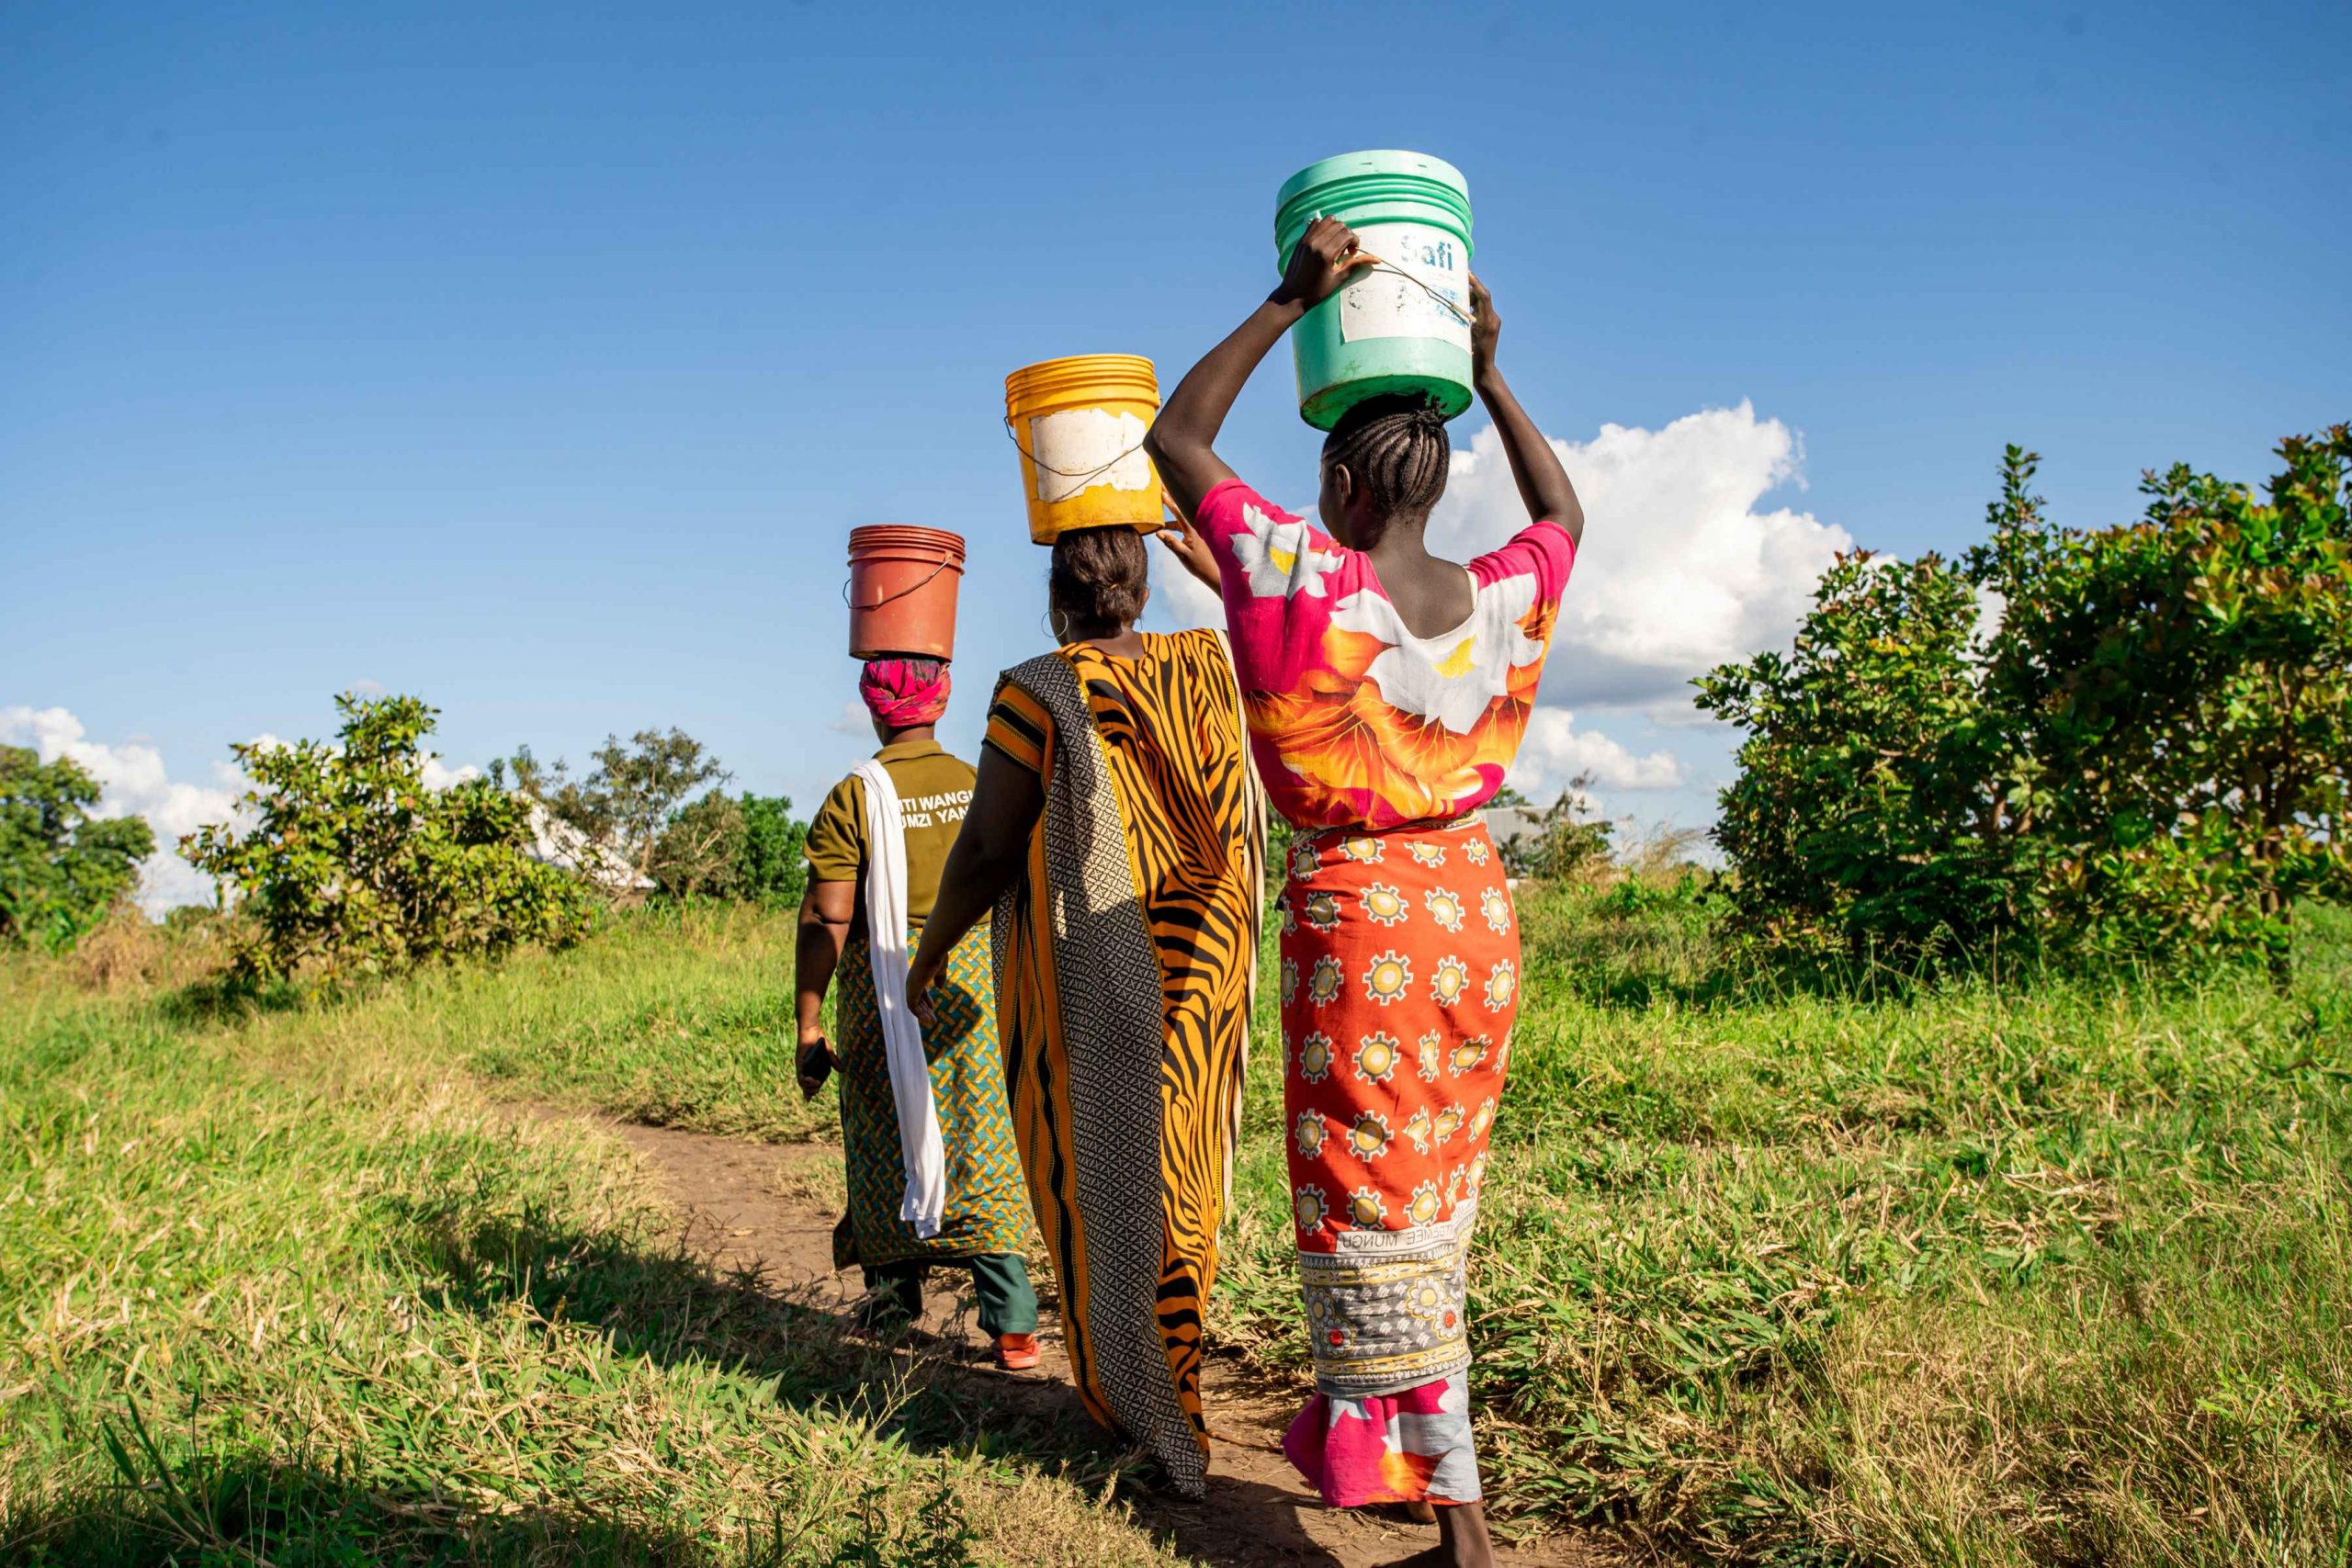 Women carrying buckets on their heads through the landscape